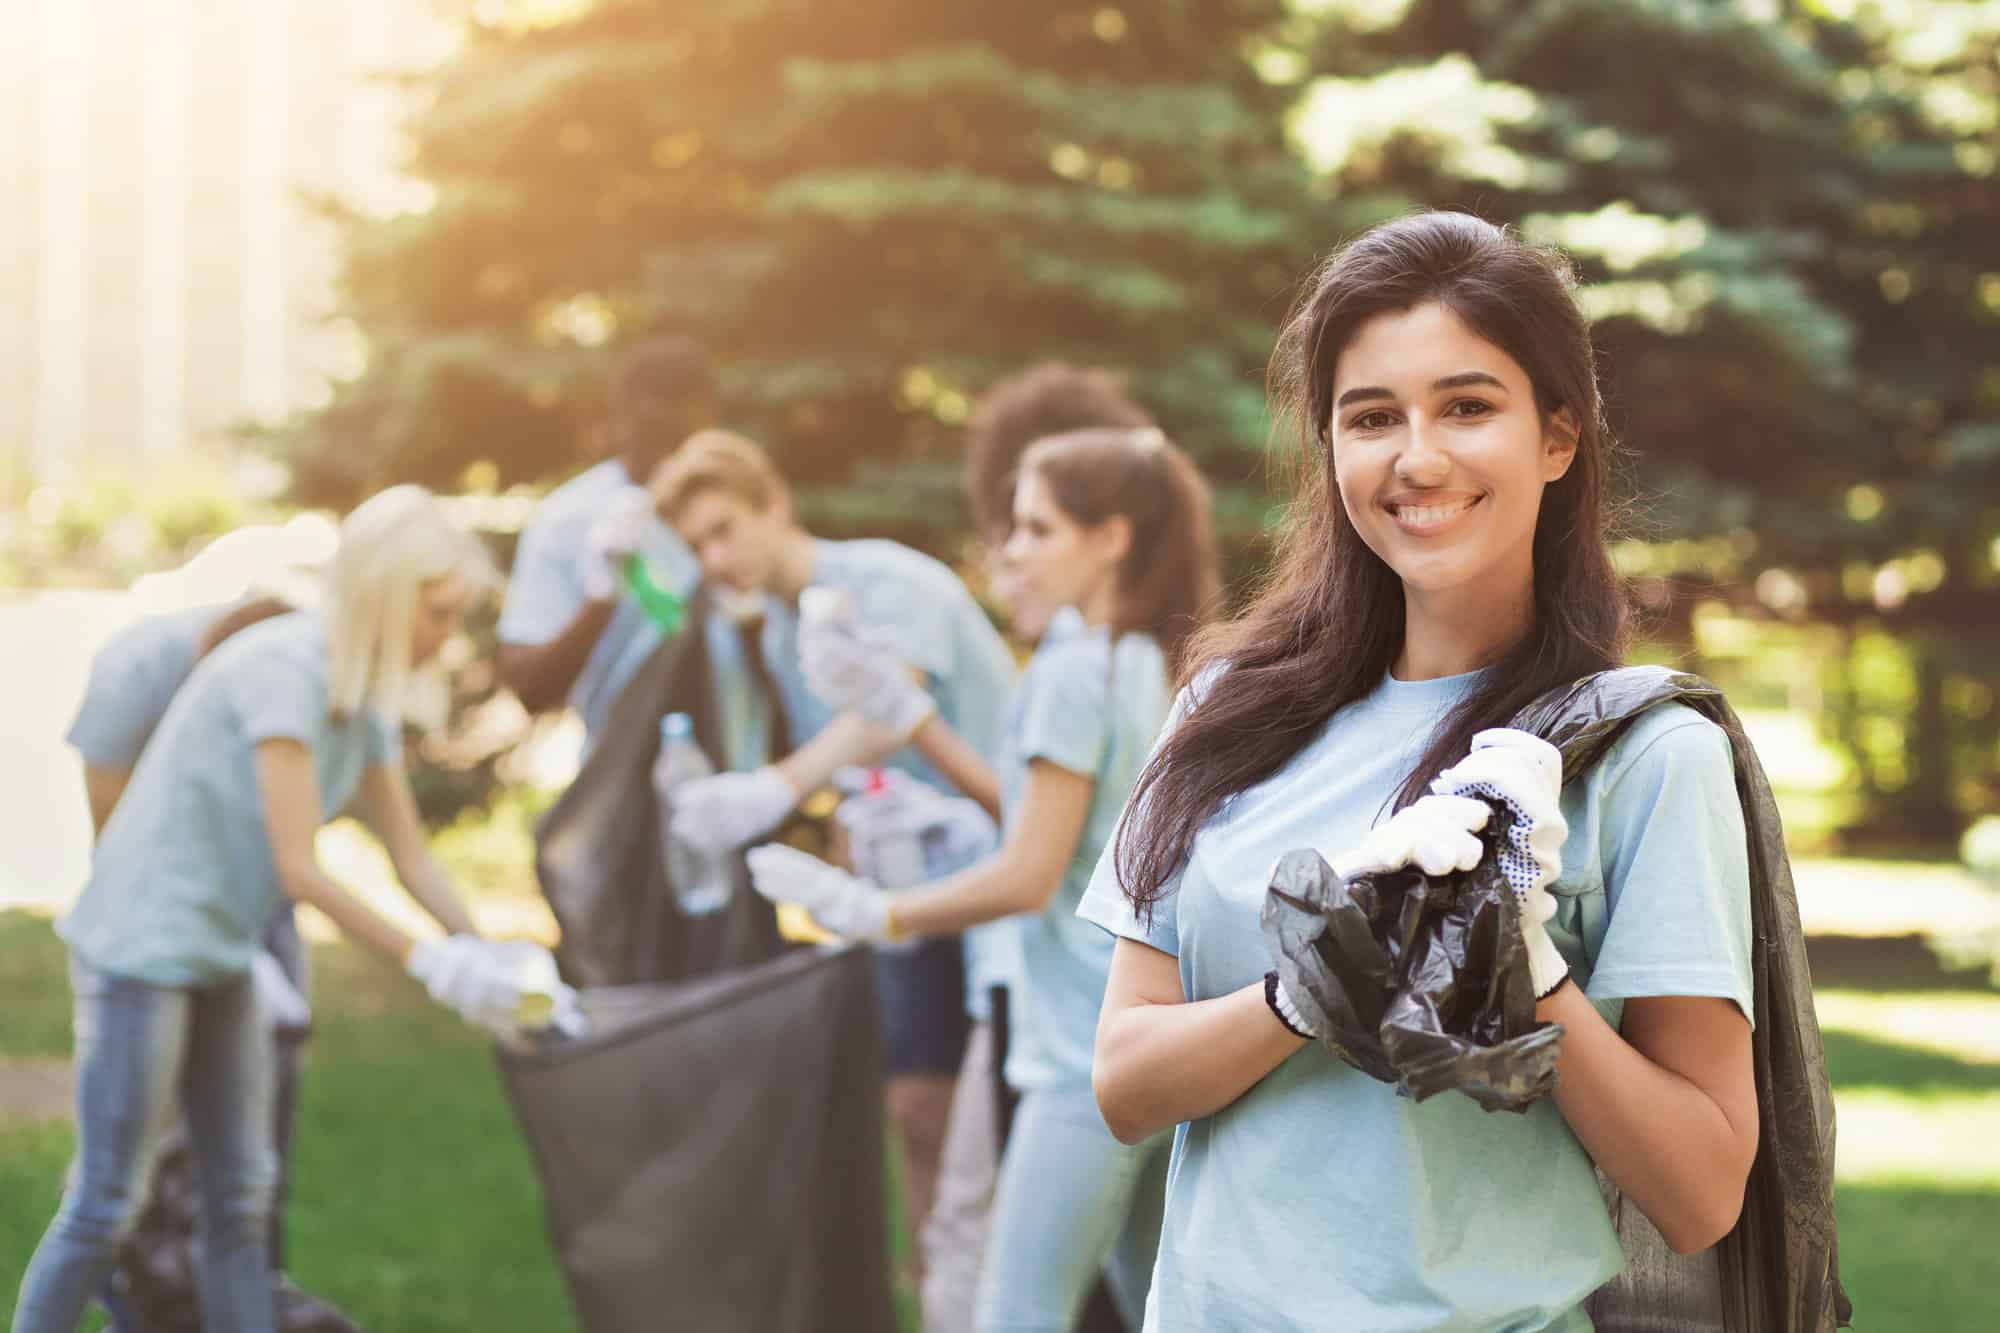 A volunteer smiles at the camera with a trash bag slung around their shoulder while others in the background help clean up a park.